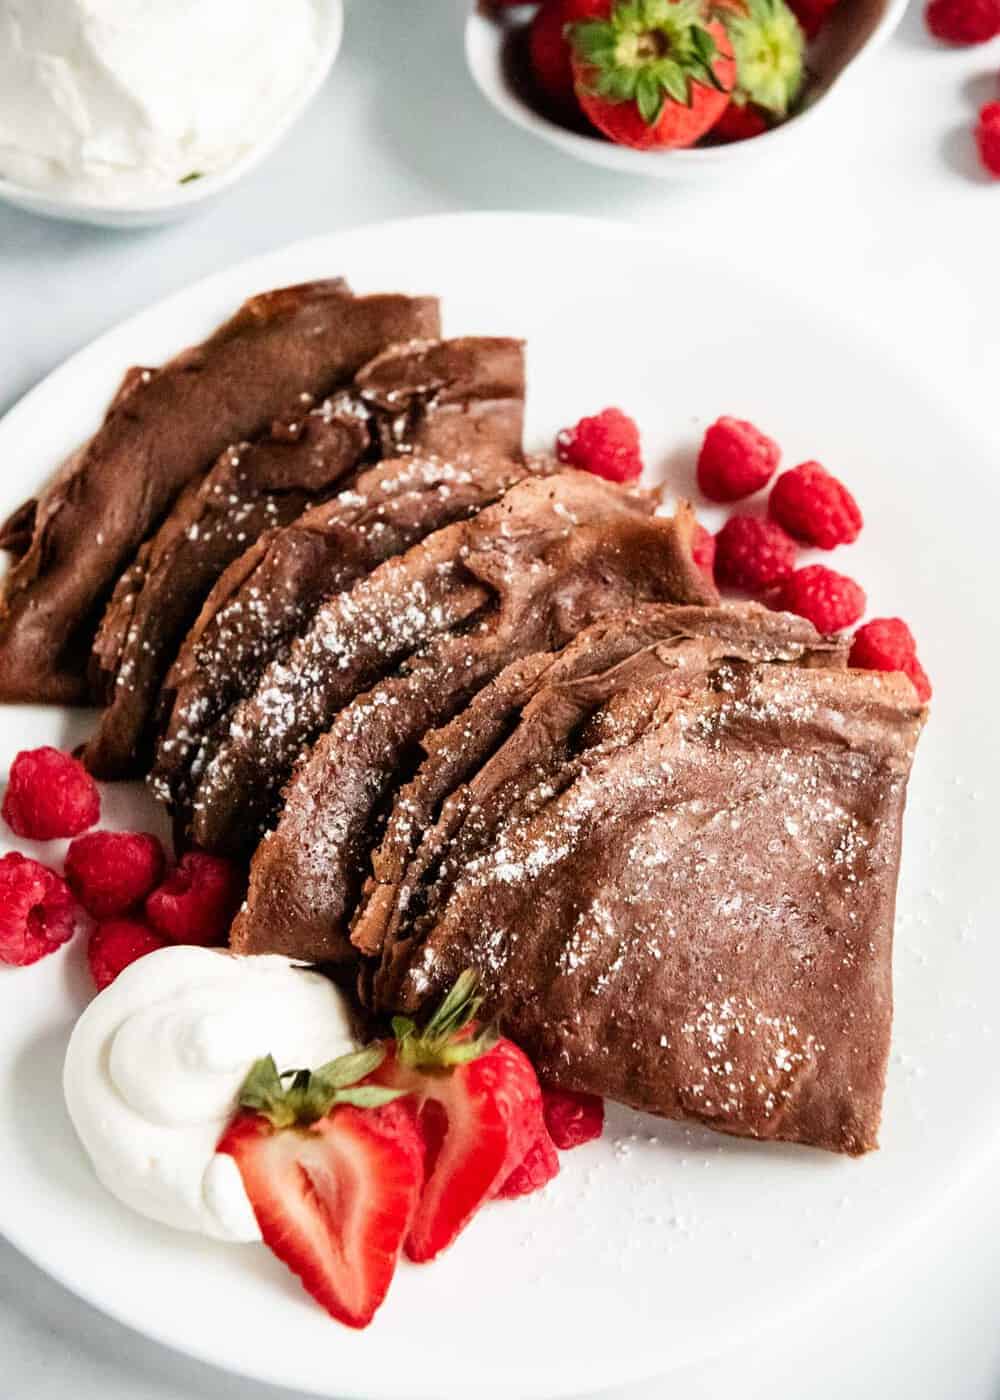 Chocolate crepes on white plate.